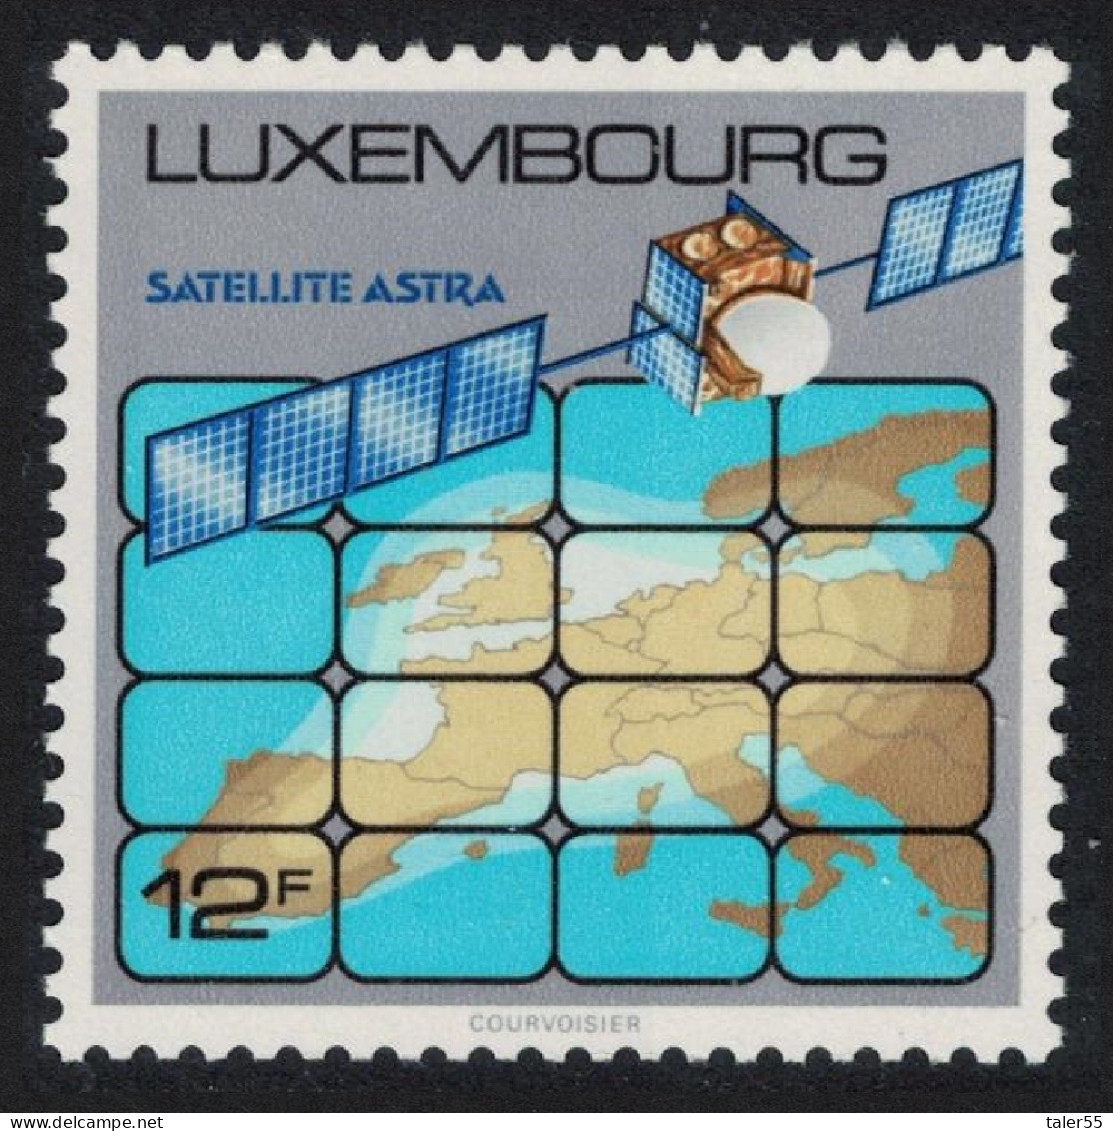 Luxembourg Launch Of 16-channel TV Satellite 1989 MNH SG#1245 MI#1218 - Neufs